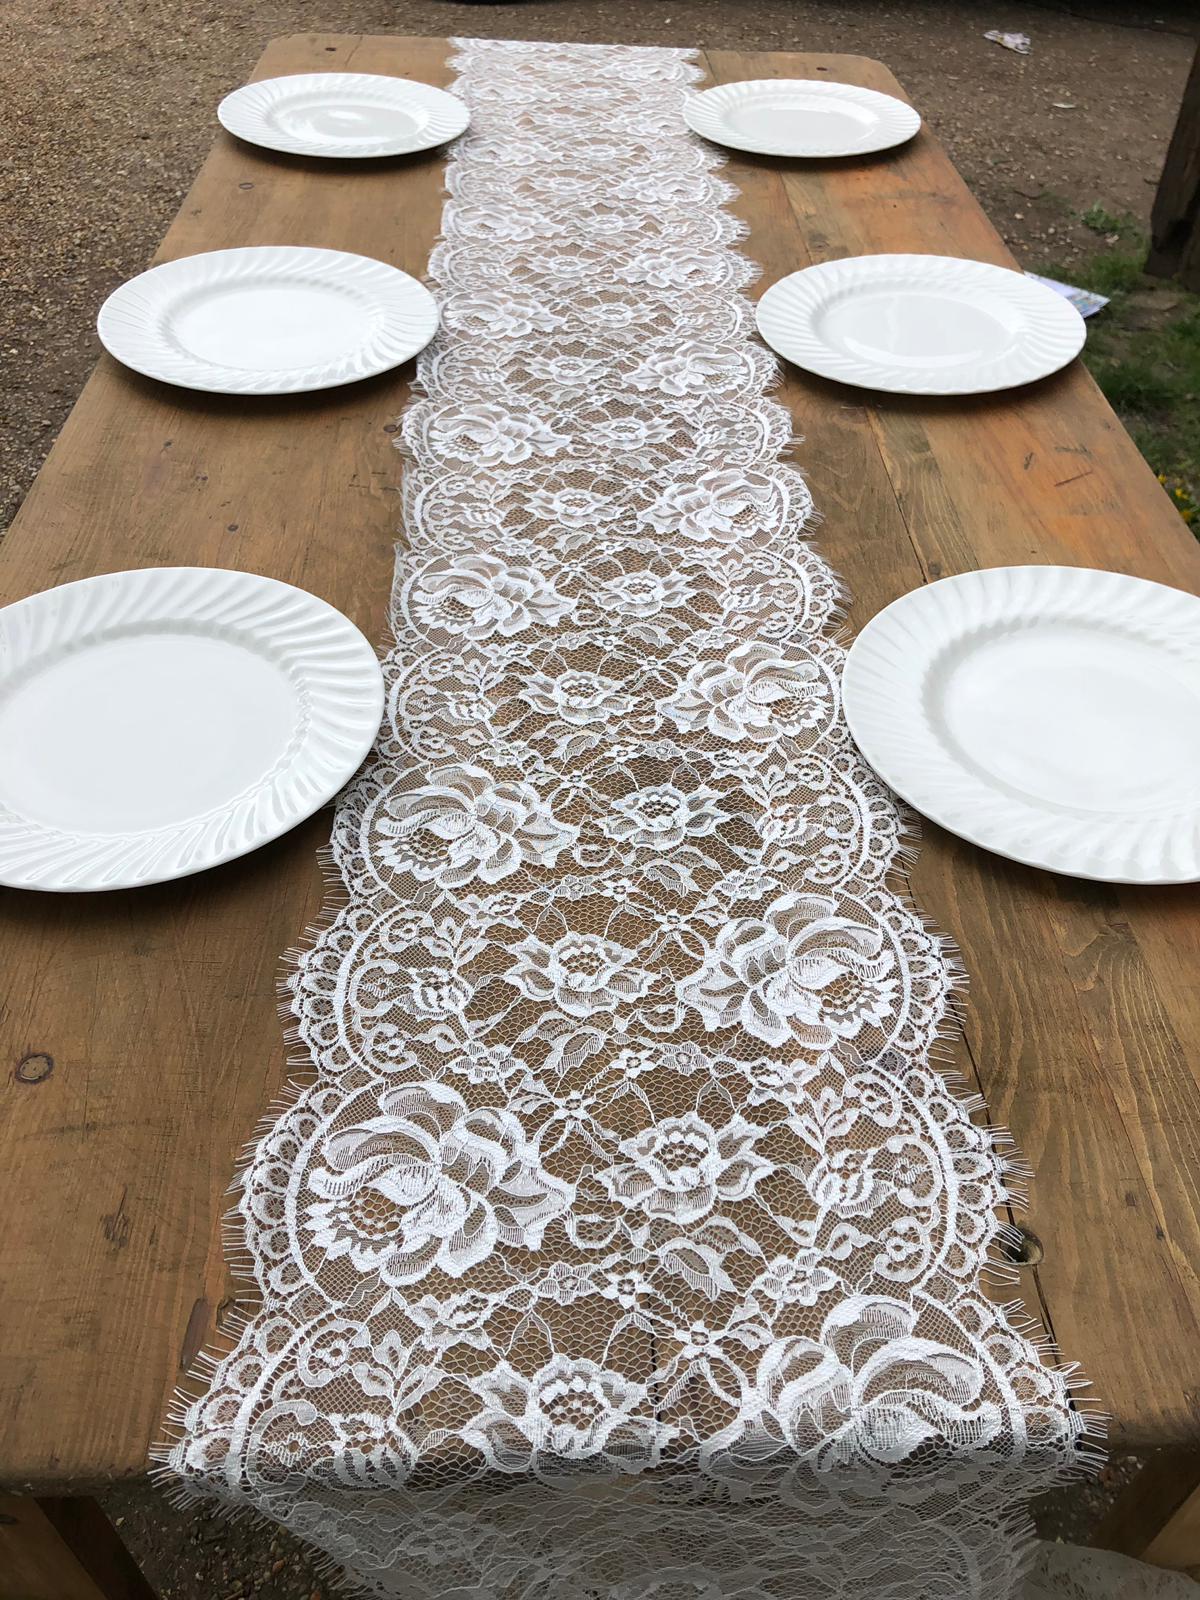 Vintage Lace Table Runner Hire • WA Carr & Son